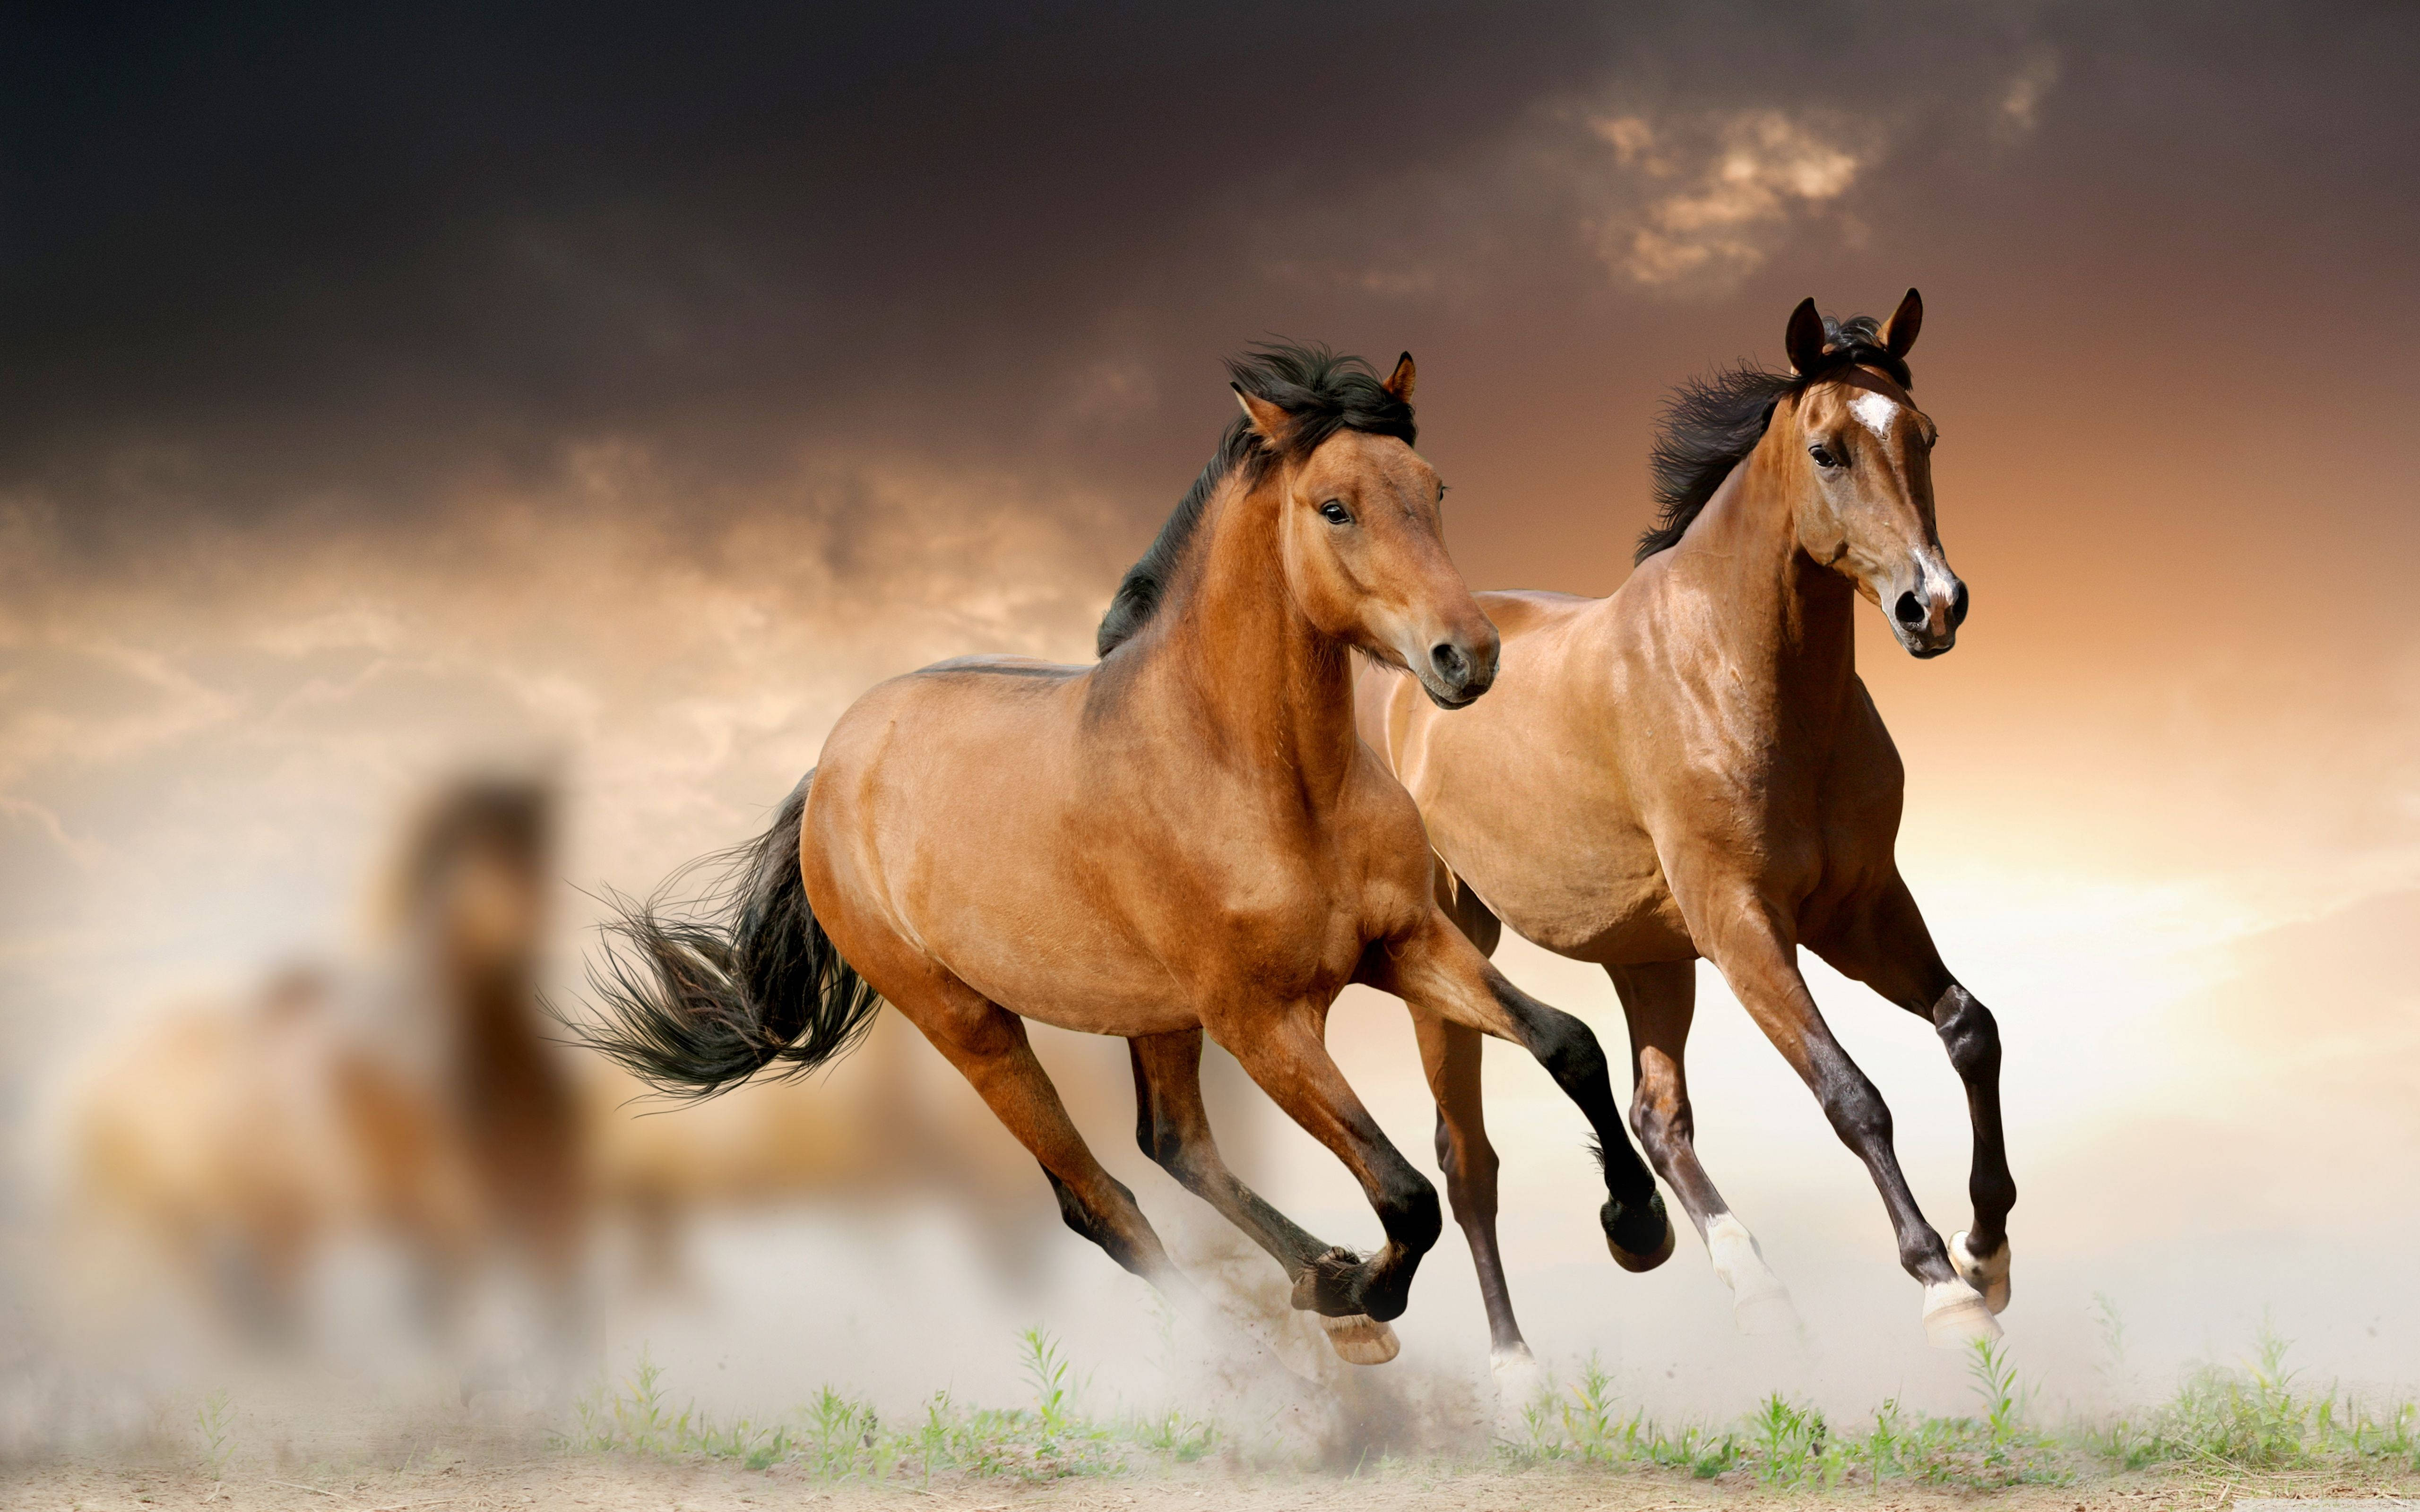 Brown Horses Galloping In Sunset 4k Background